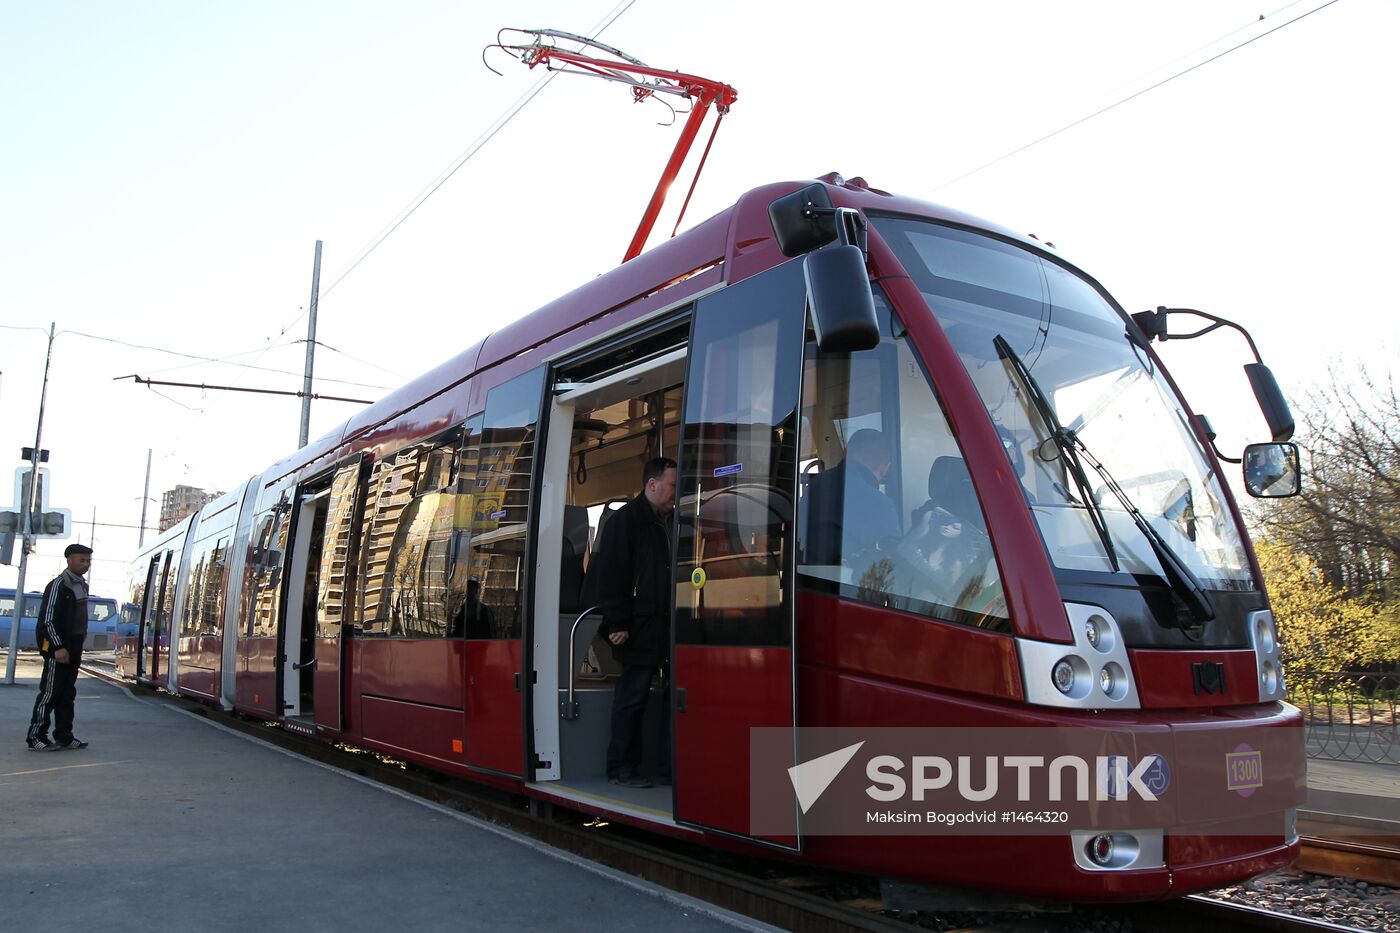 High-speed tramway for 2013 Universiade